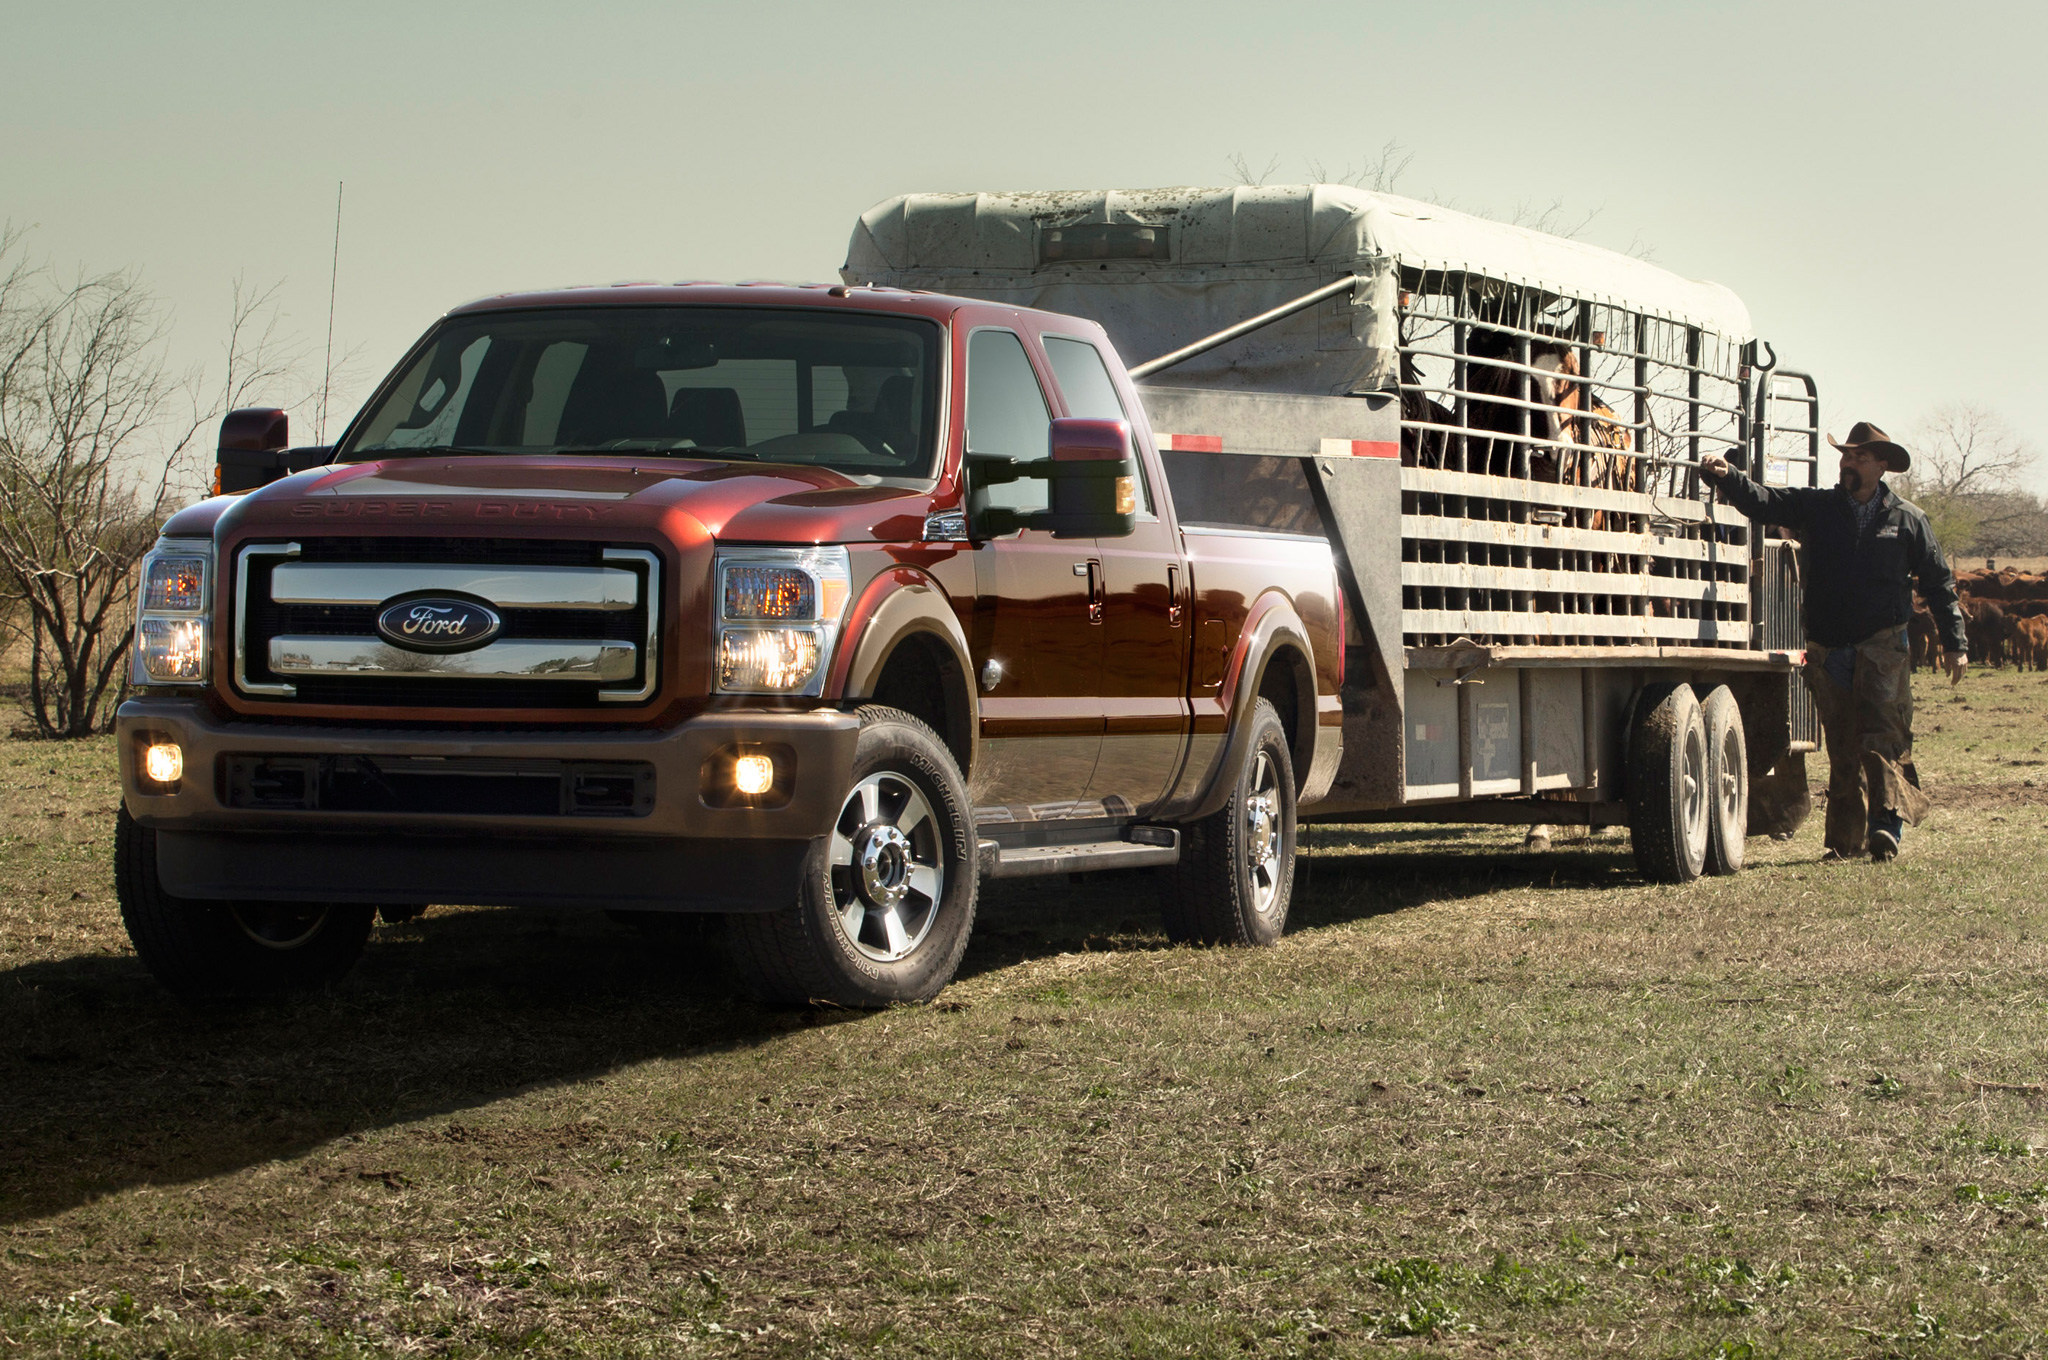 2015 Ford F-Series Super Duty Pics, Vehicles Collection